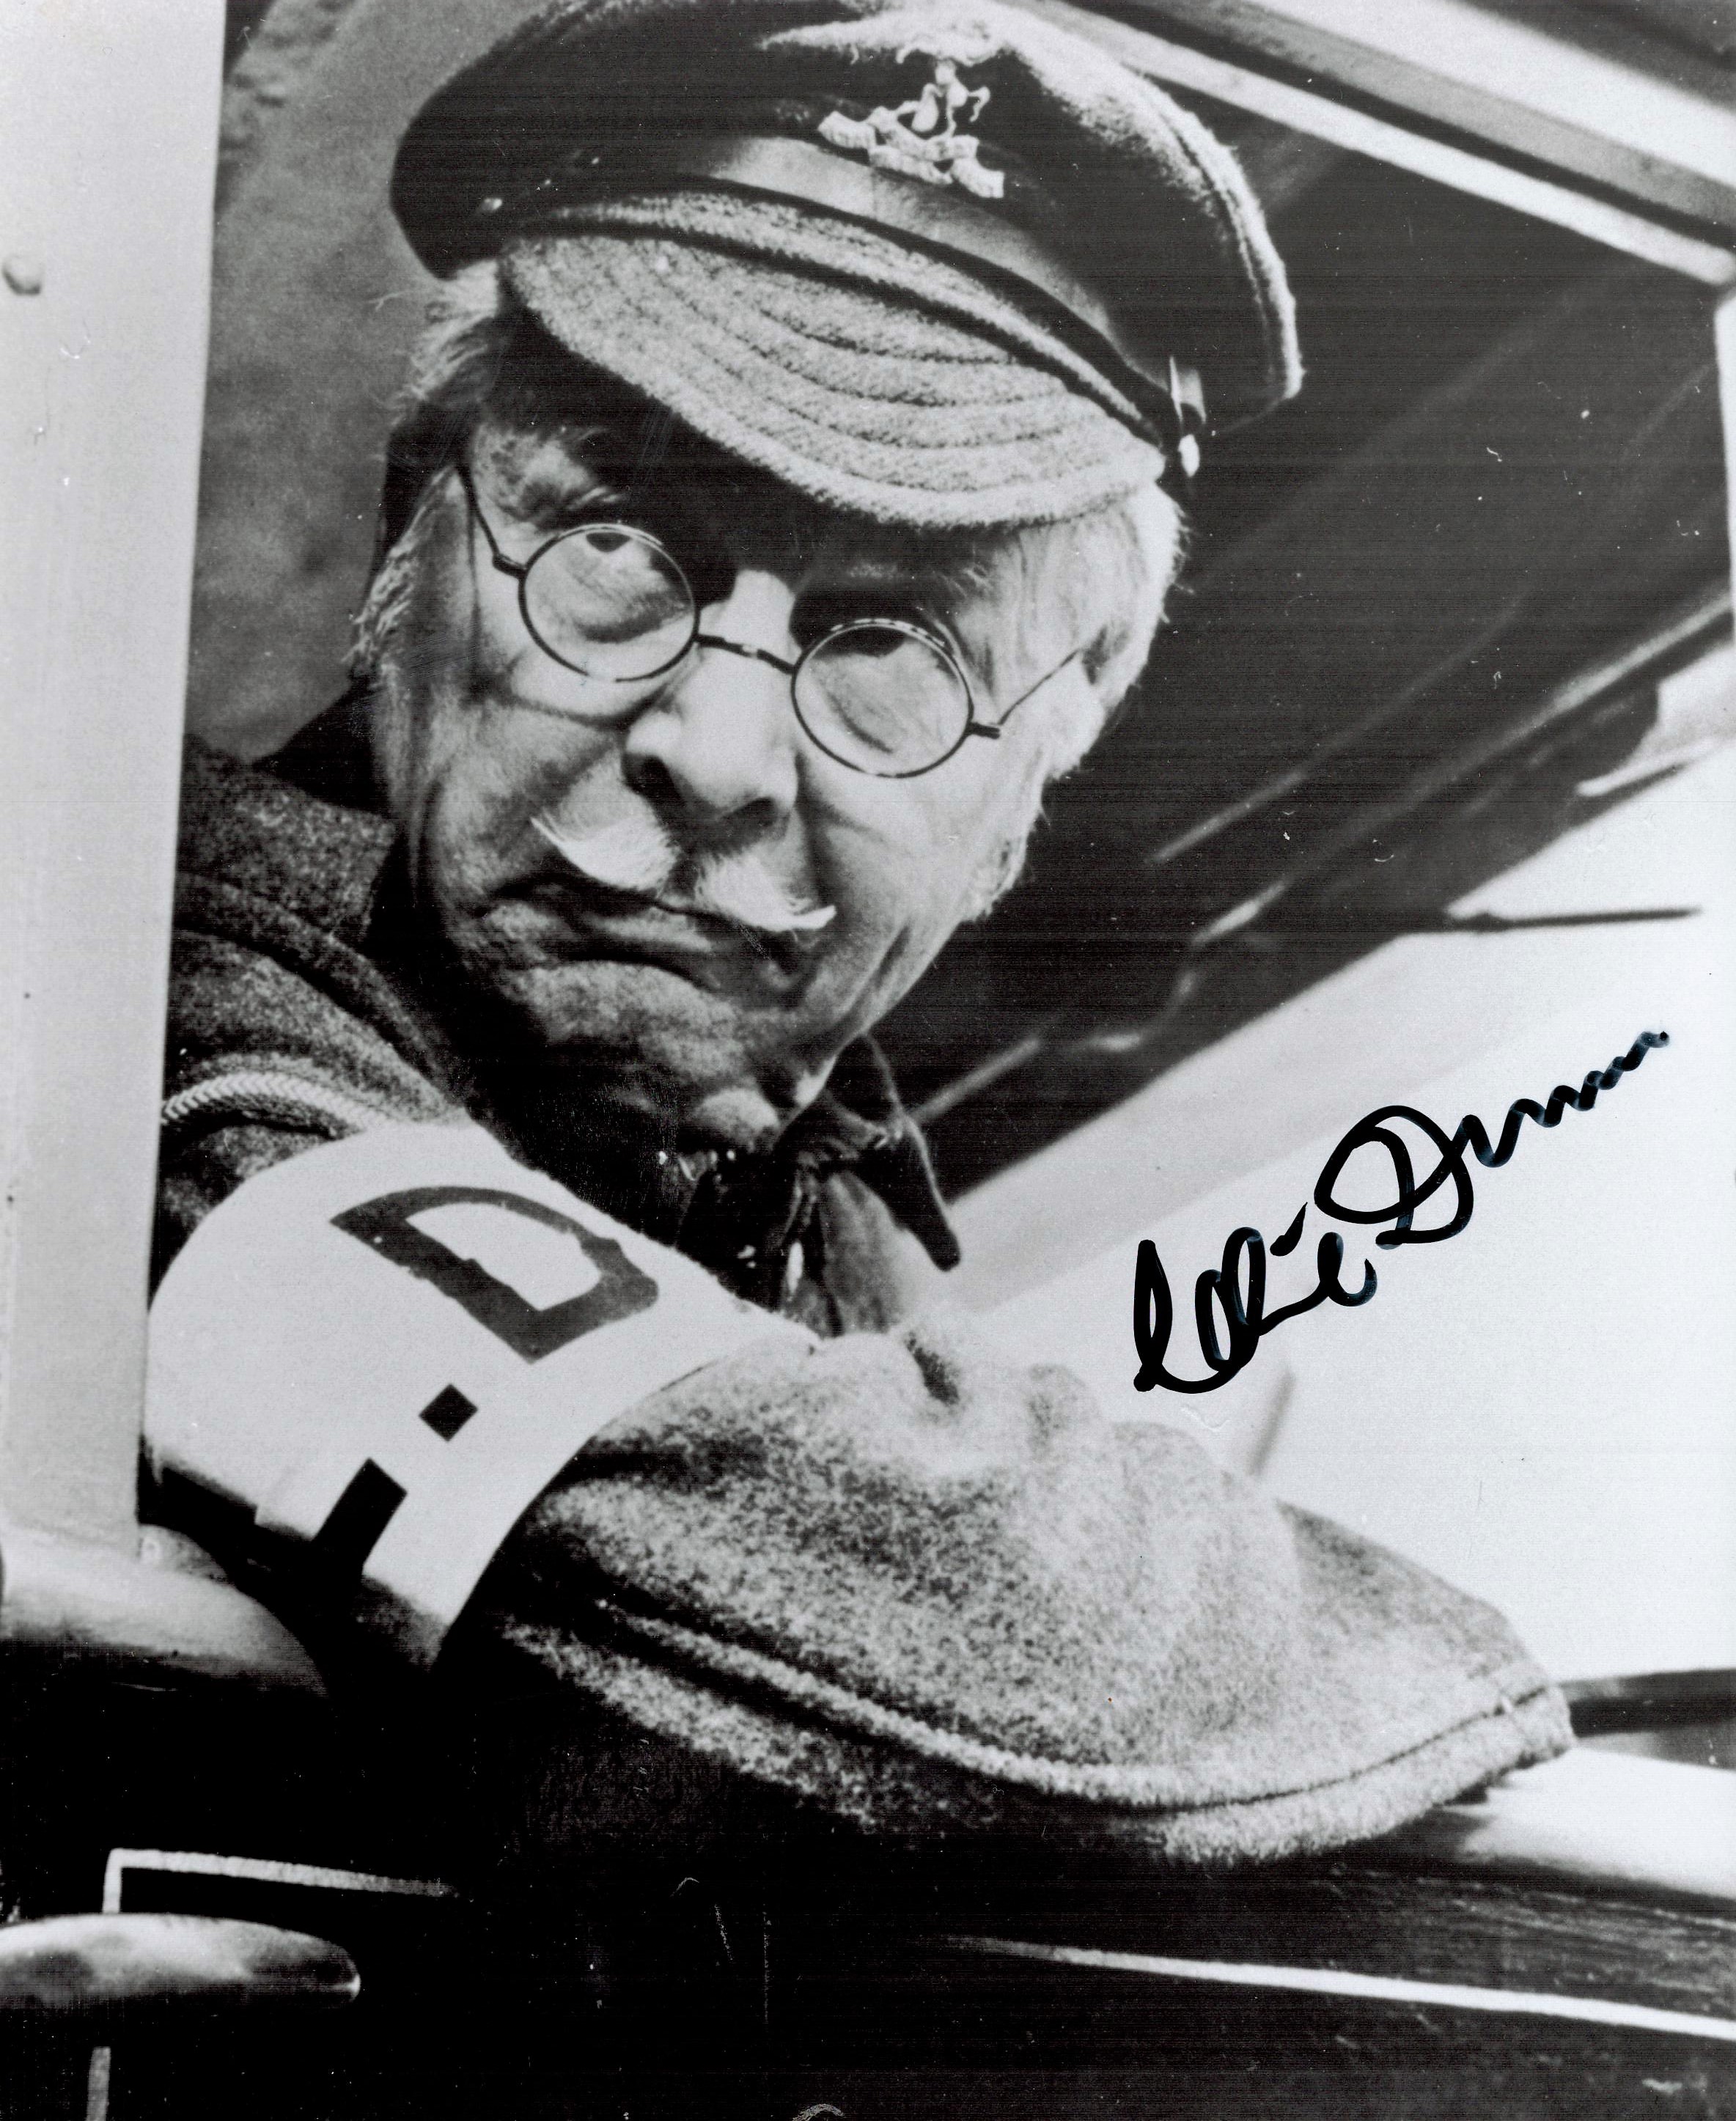 Dads Army signed collection two 10 x 8 inch photos Clive Dunn, Phillip Madoc, . Good condition.